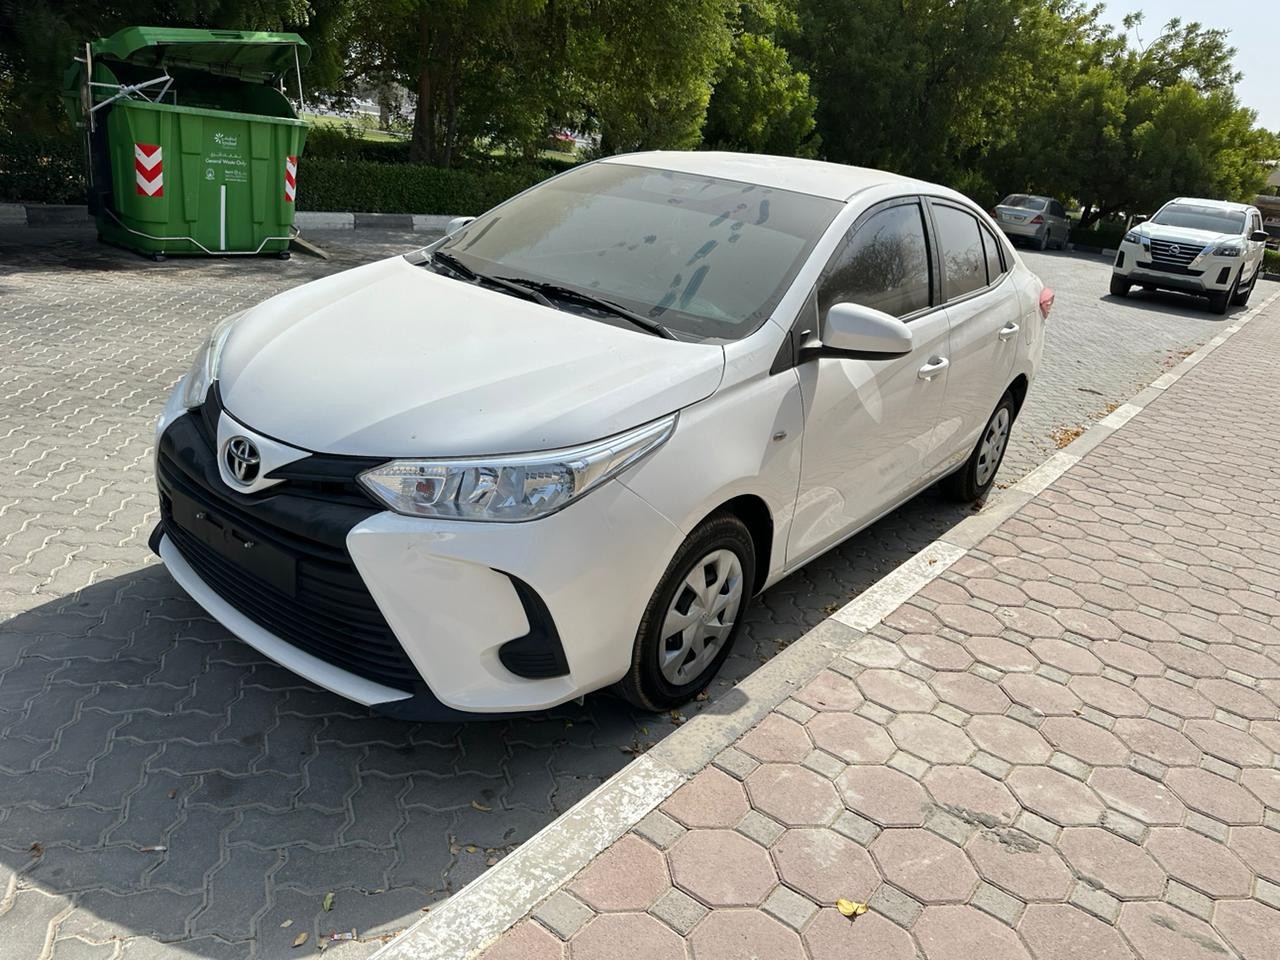 Toyota MODEL YEAR:2021 for sale-pic_6